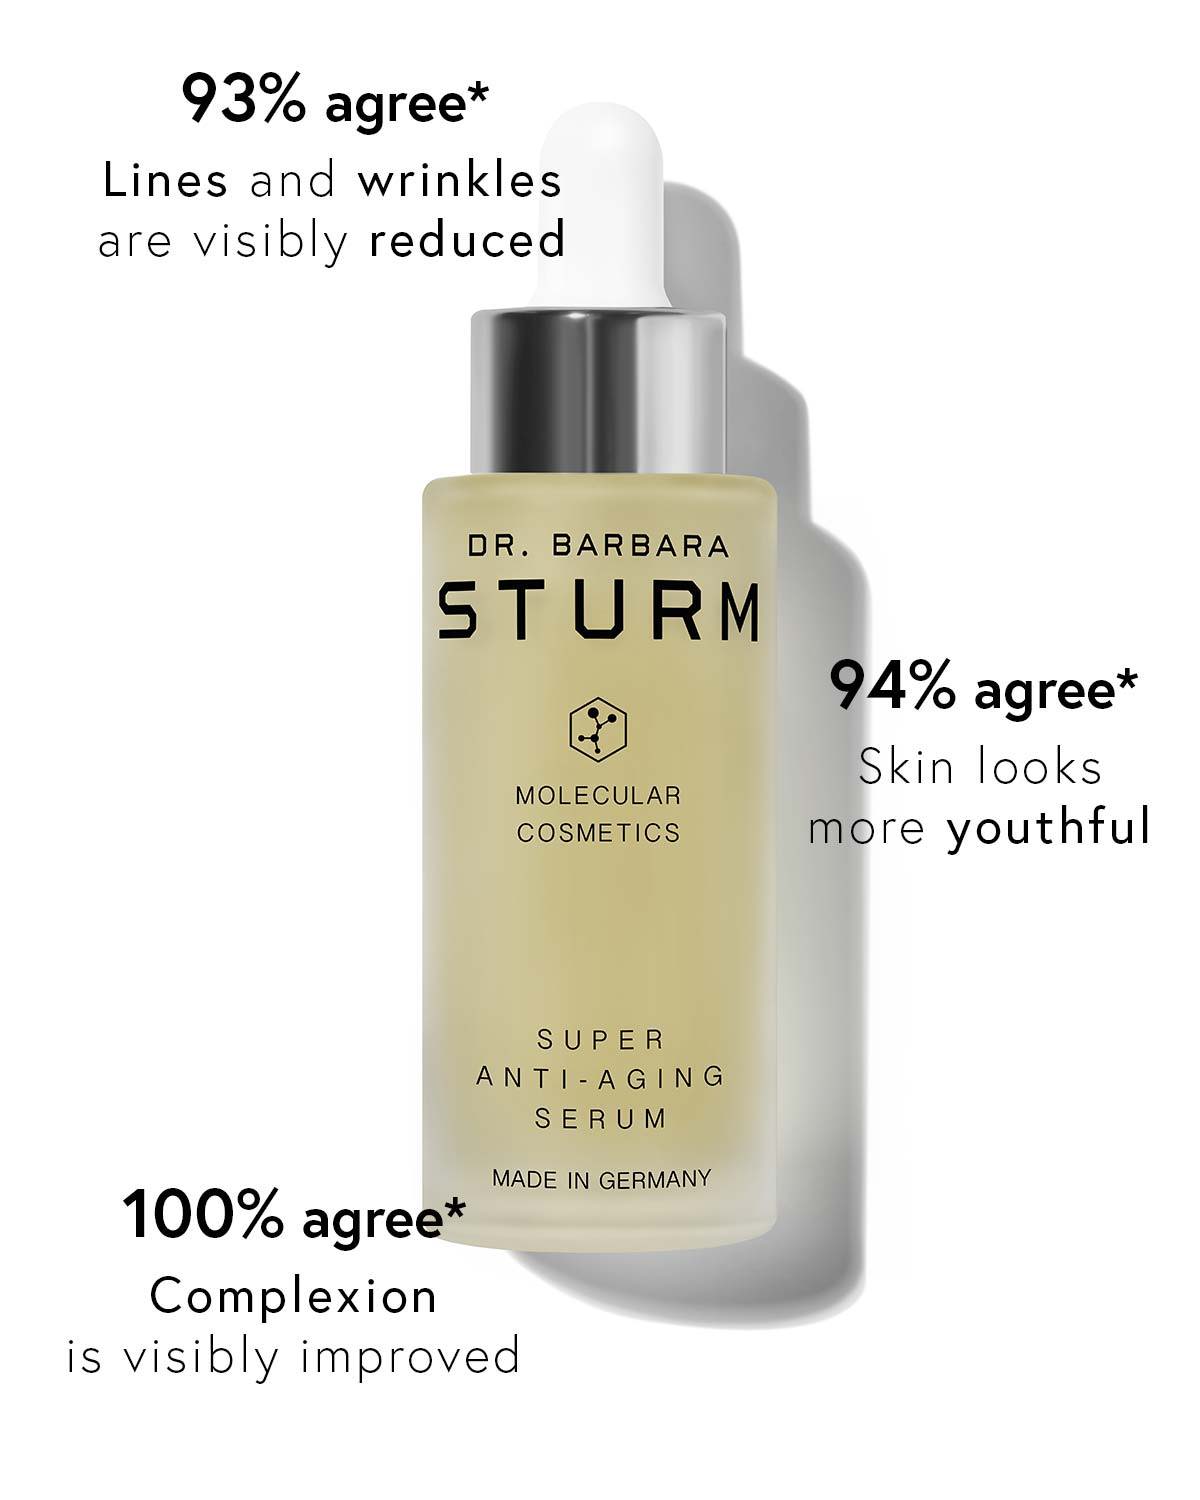 Super anti-aging serum with stats